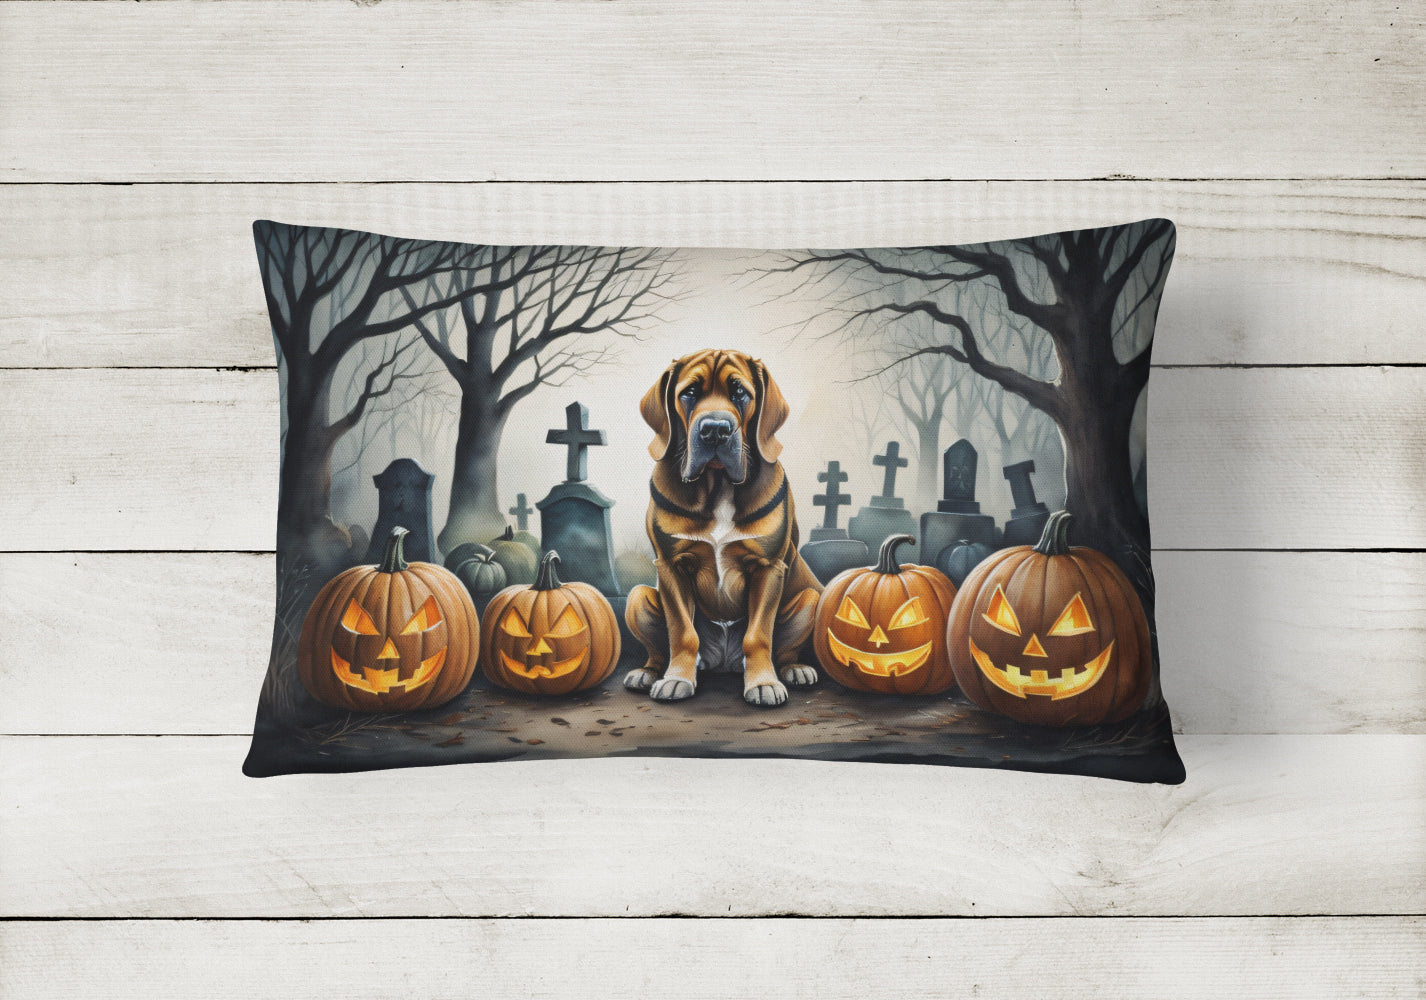 Buy this Bloodhound Spooky Halloween Fabric Decorative Pillow